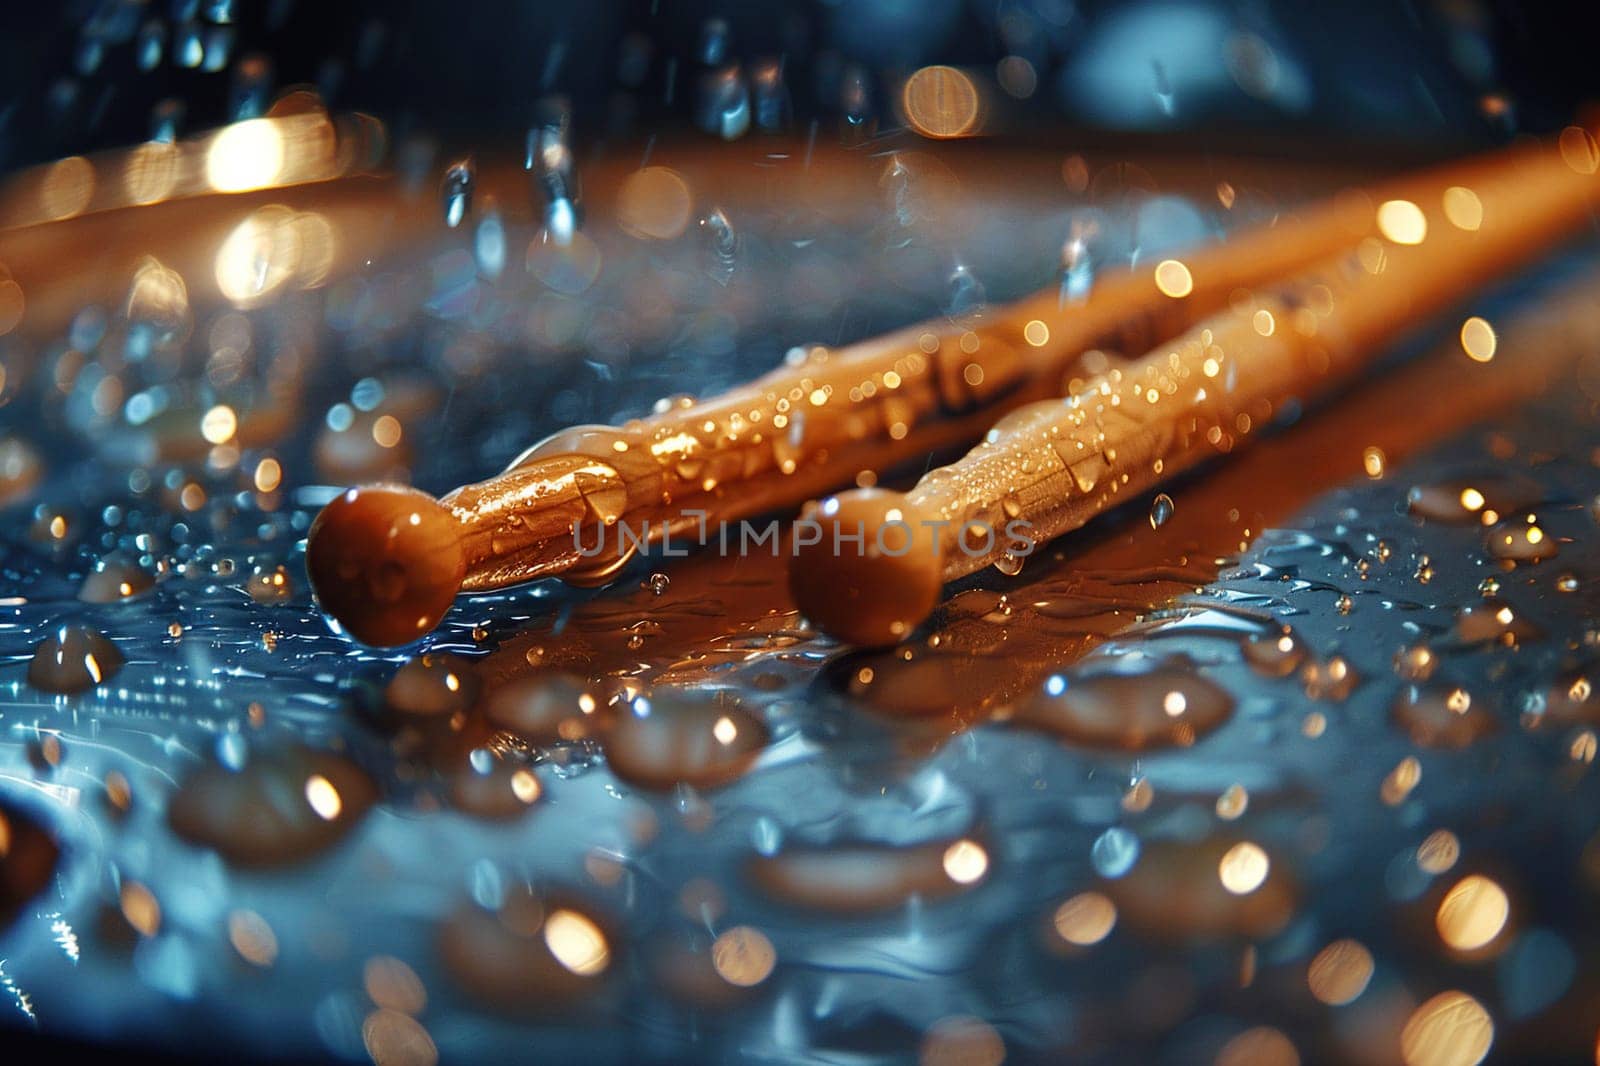 Drumsticks lie in the rain, close-up. Live music concept.